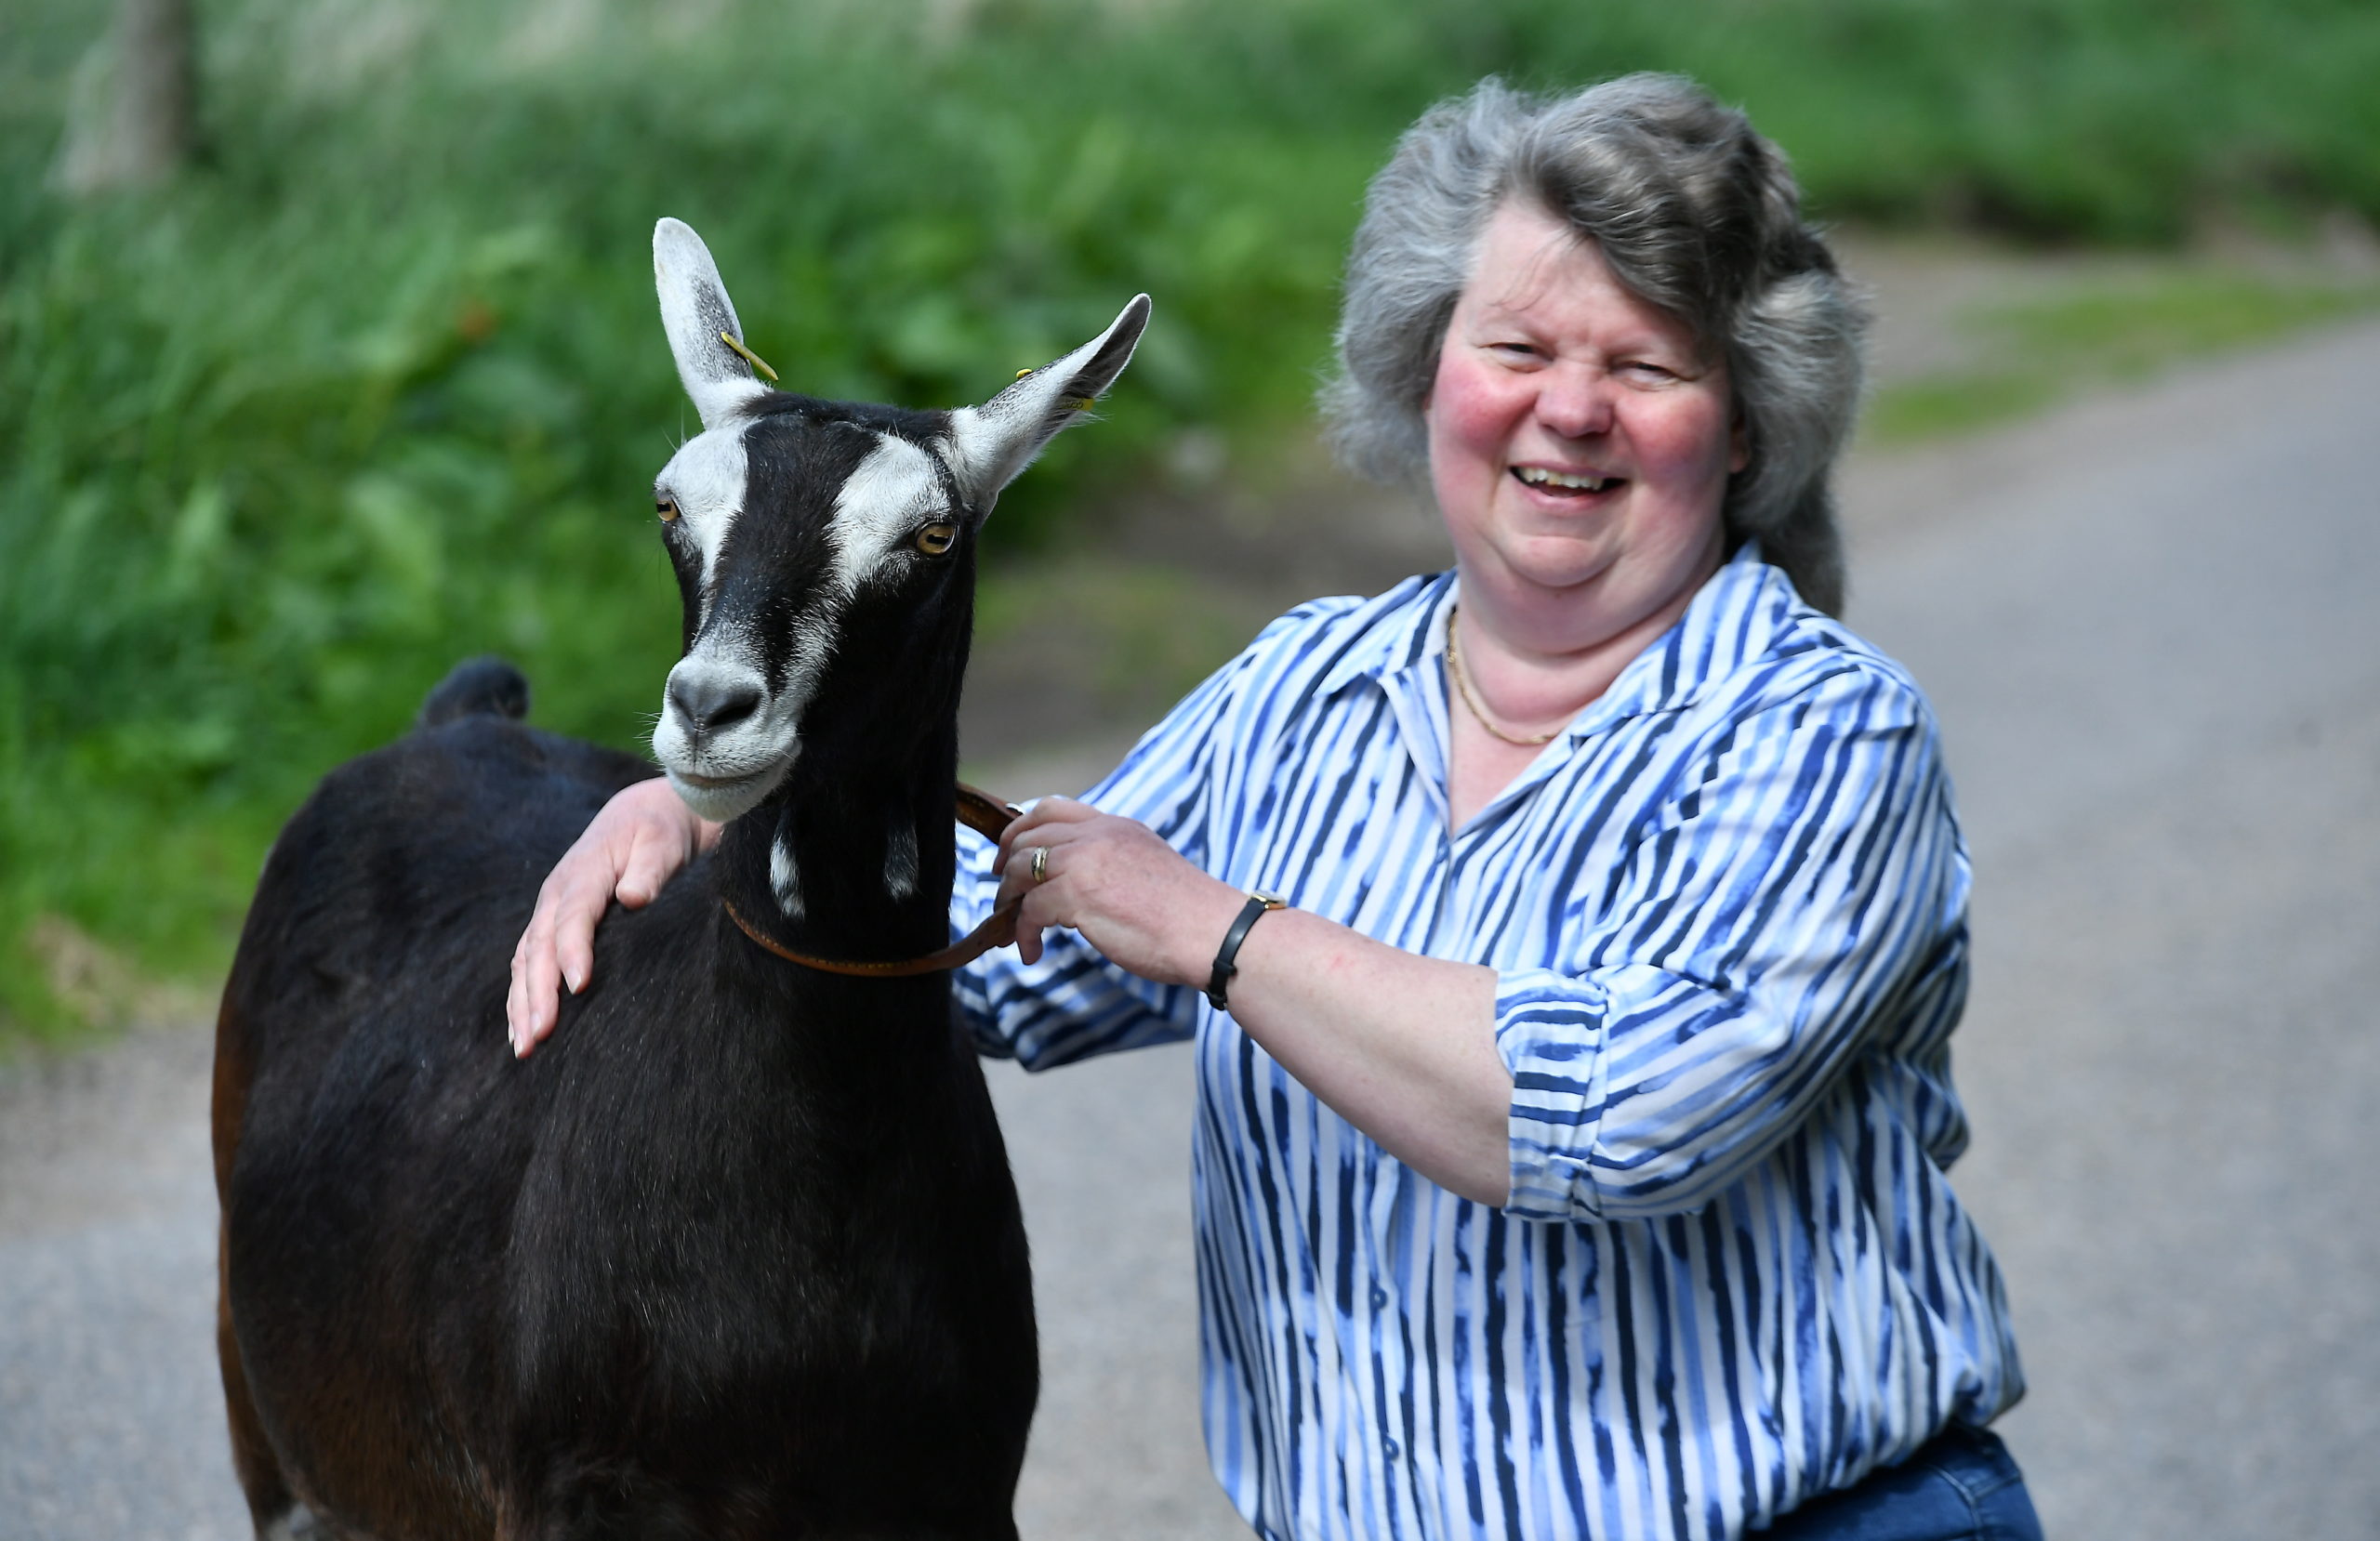 Agnes Aitken has a wealth of experience and will judge the goats at the Scottish Agricultural Show.